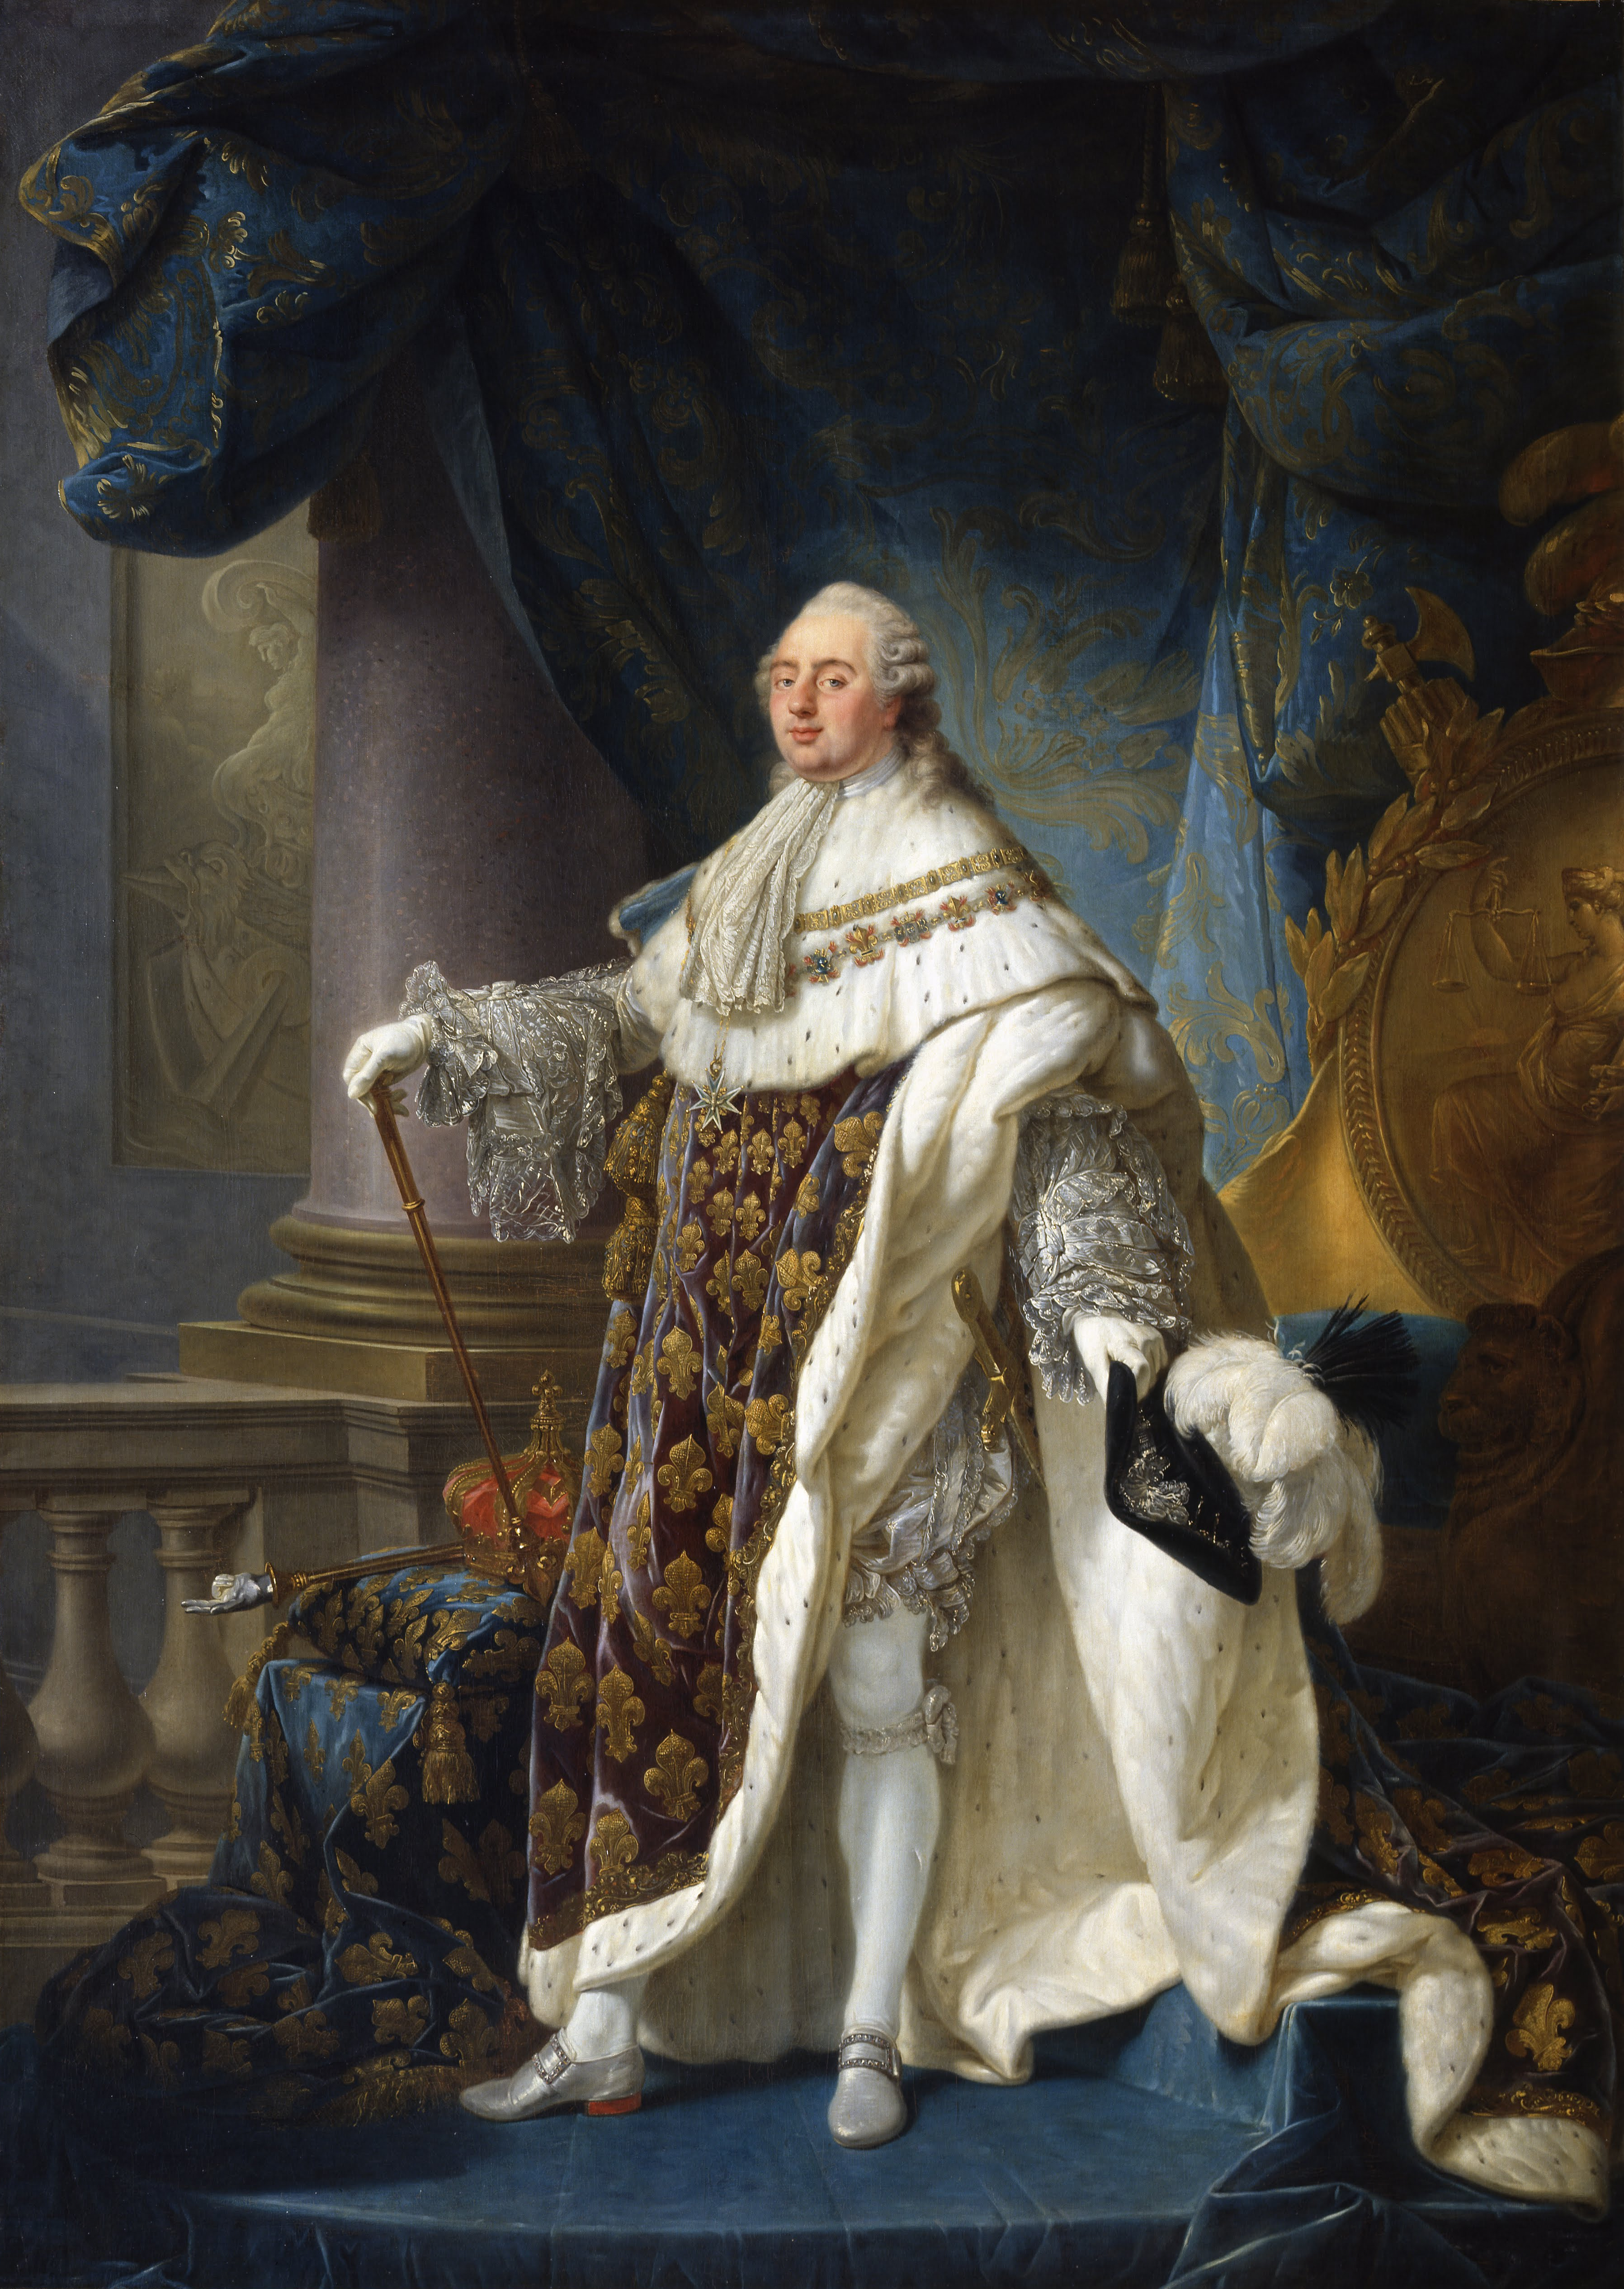 Portrait of Louis XVI, King of France and Navarre, c. 1779